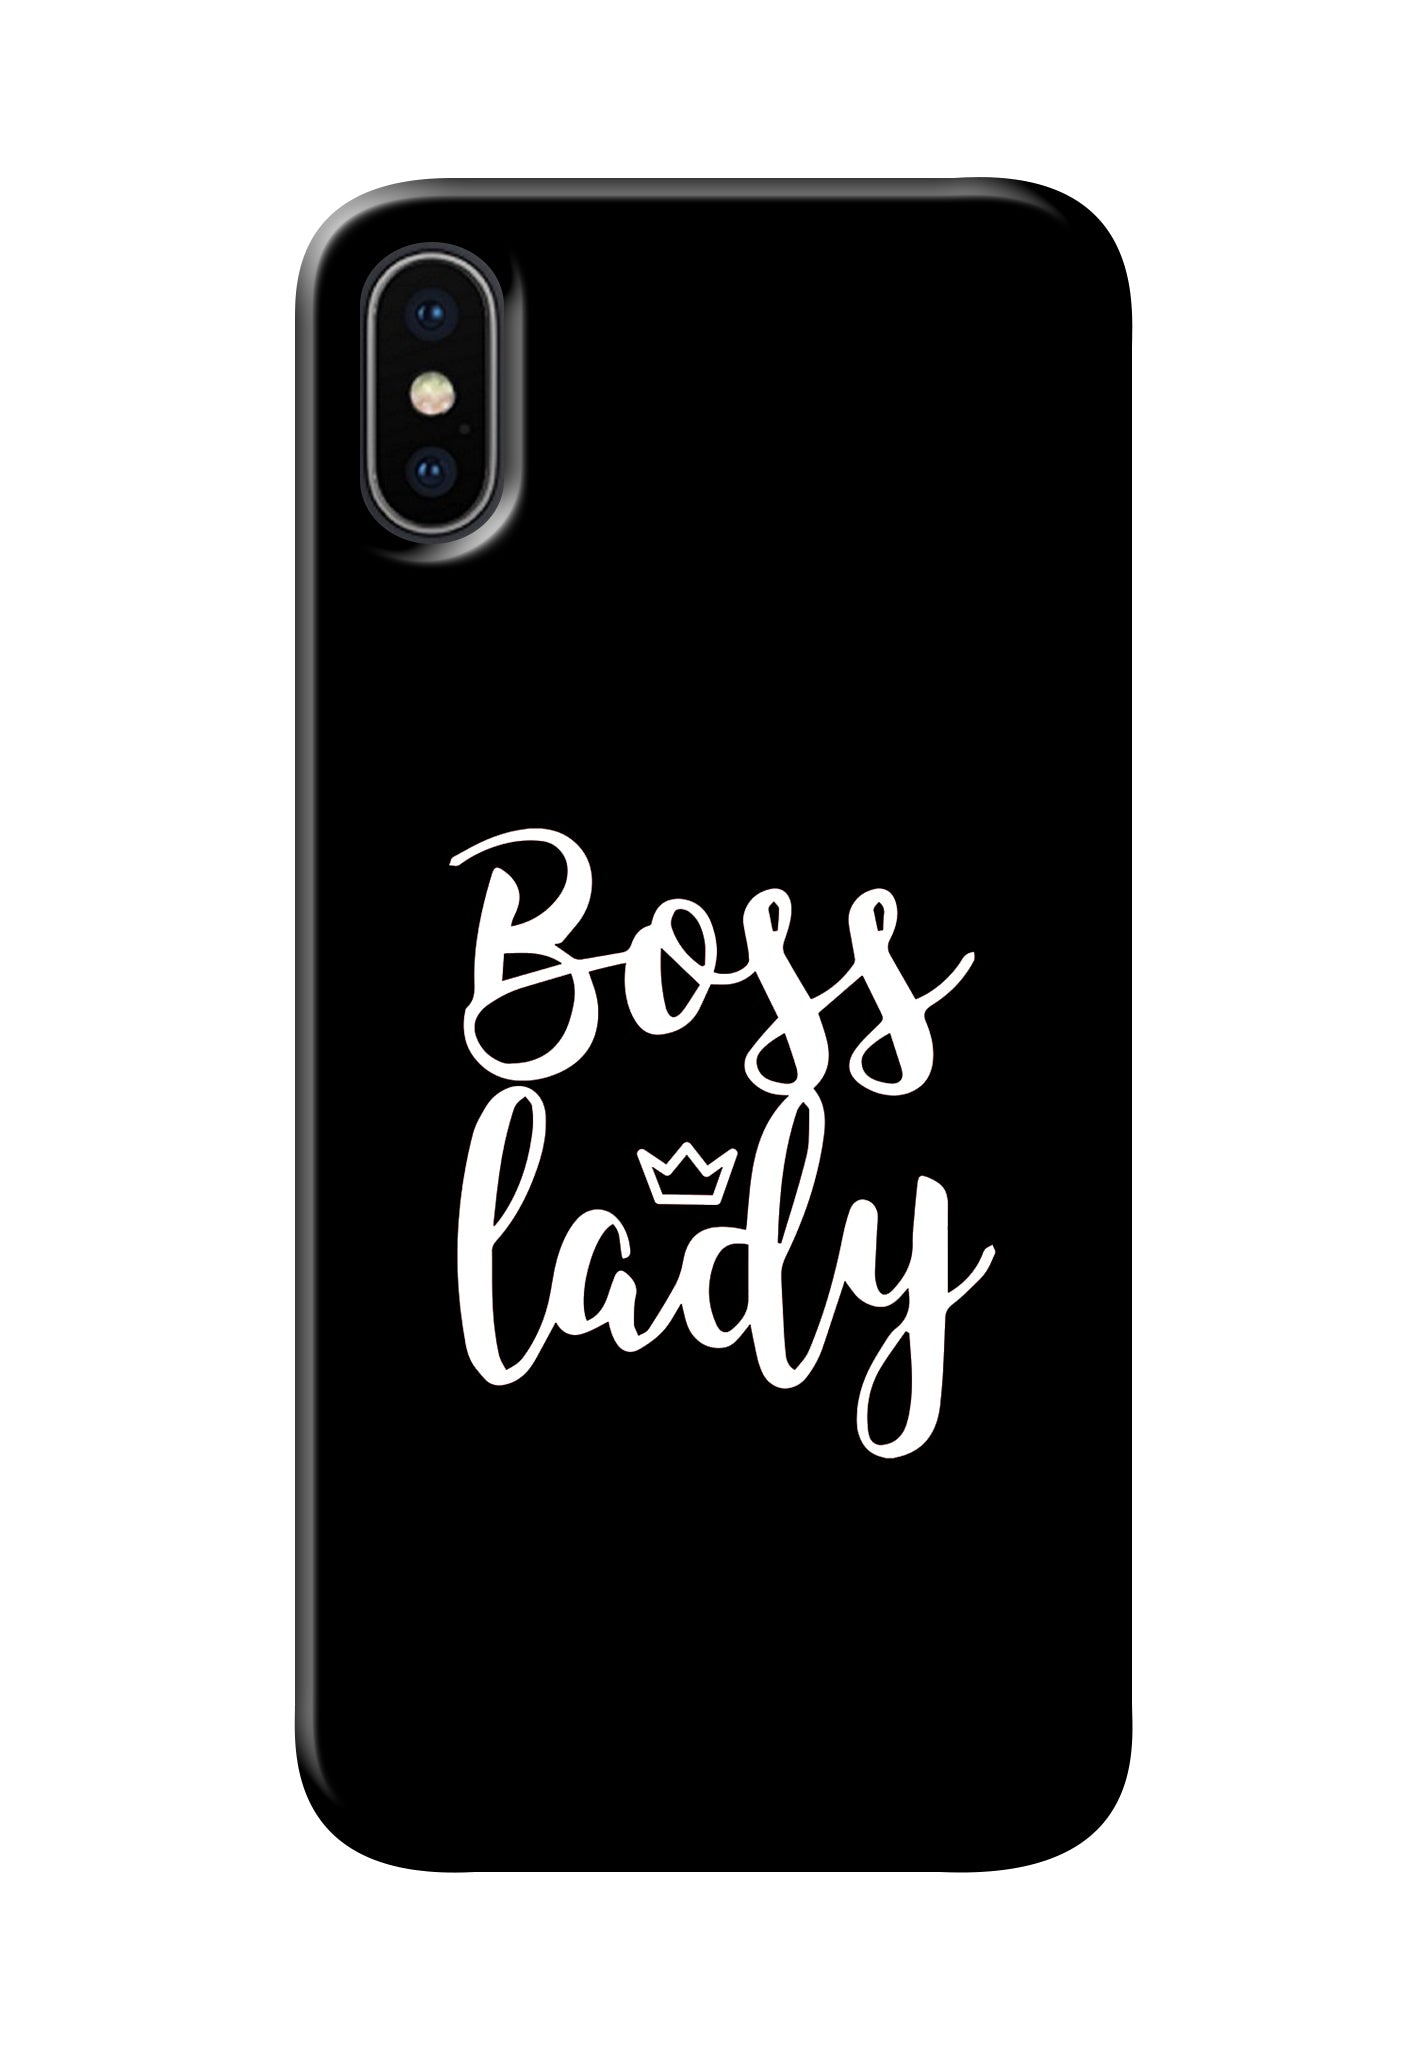 Boss Lady Case For iPhone X 